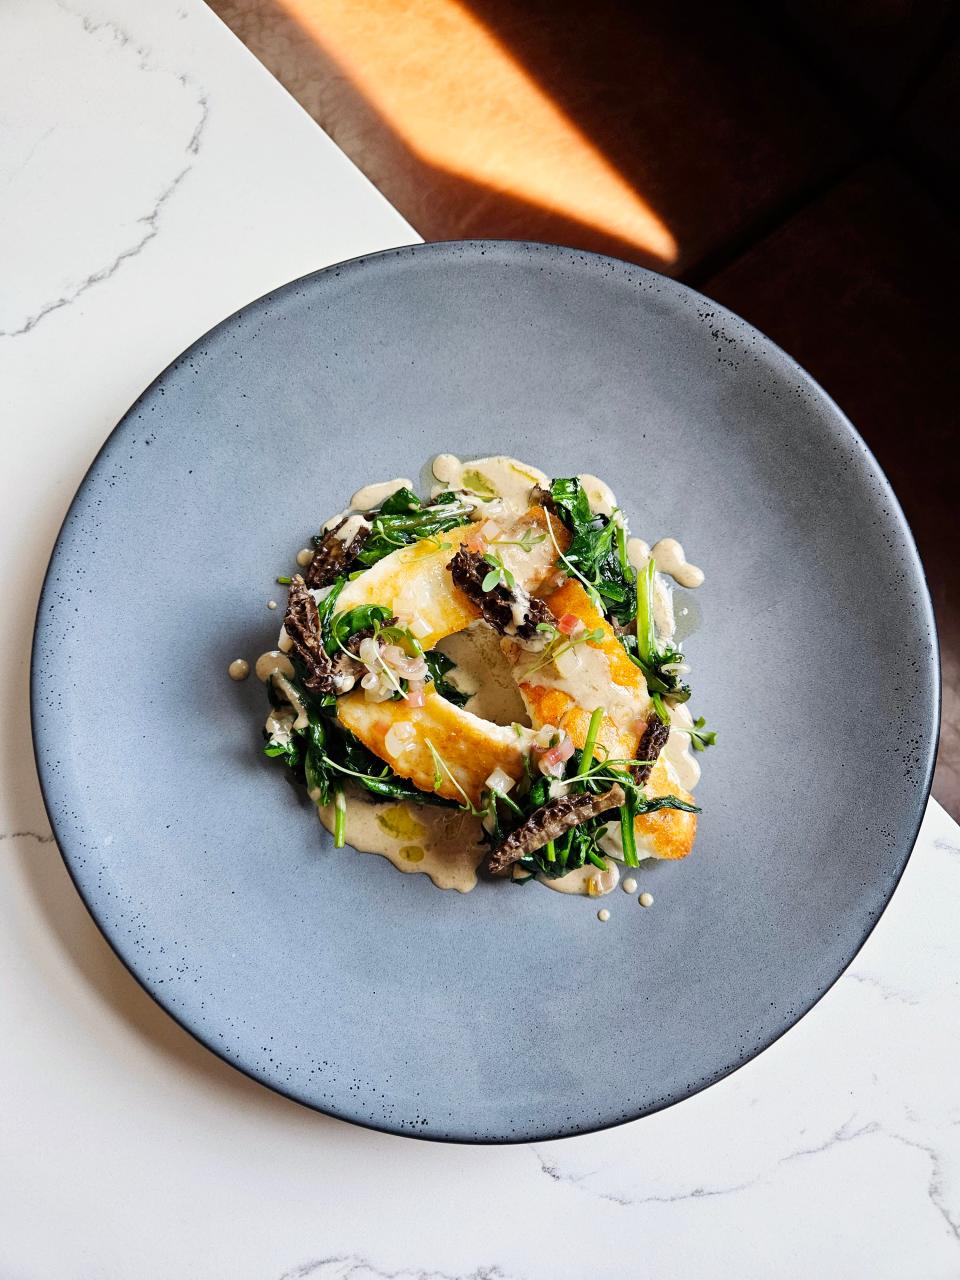 Common Lot's Chef Ehren Ryan 's springtime dish of seared wolf fish with sautéed spinach and ramps, pickled ramps, morels and morel cream sauce.